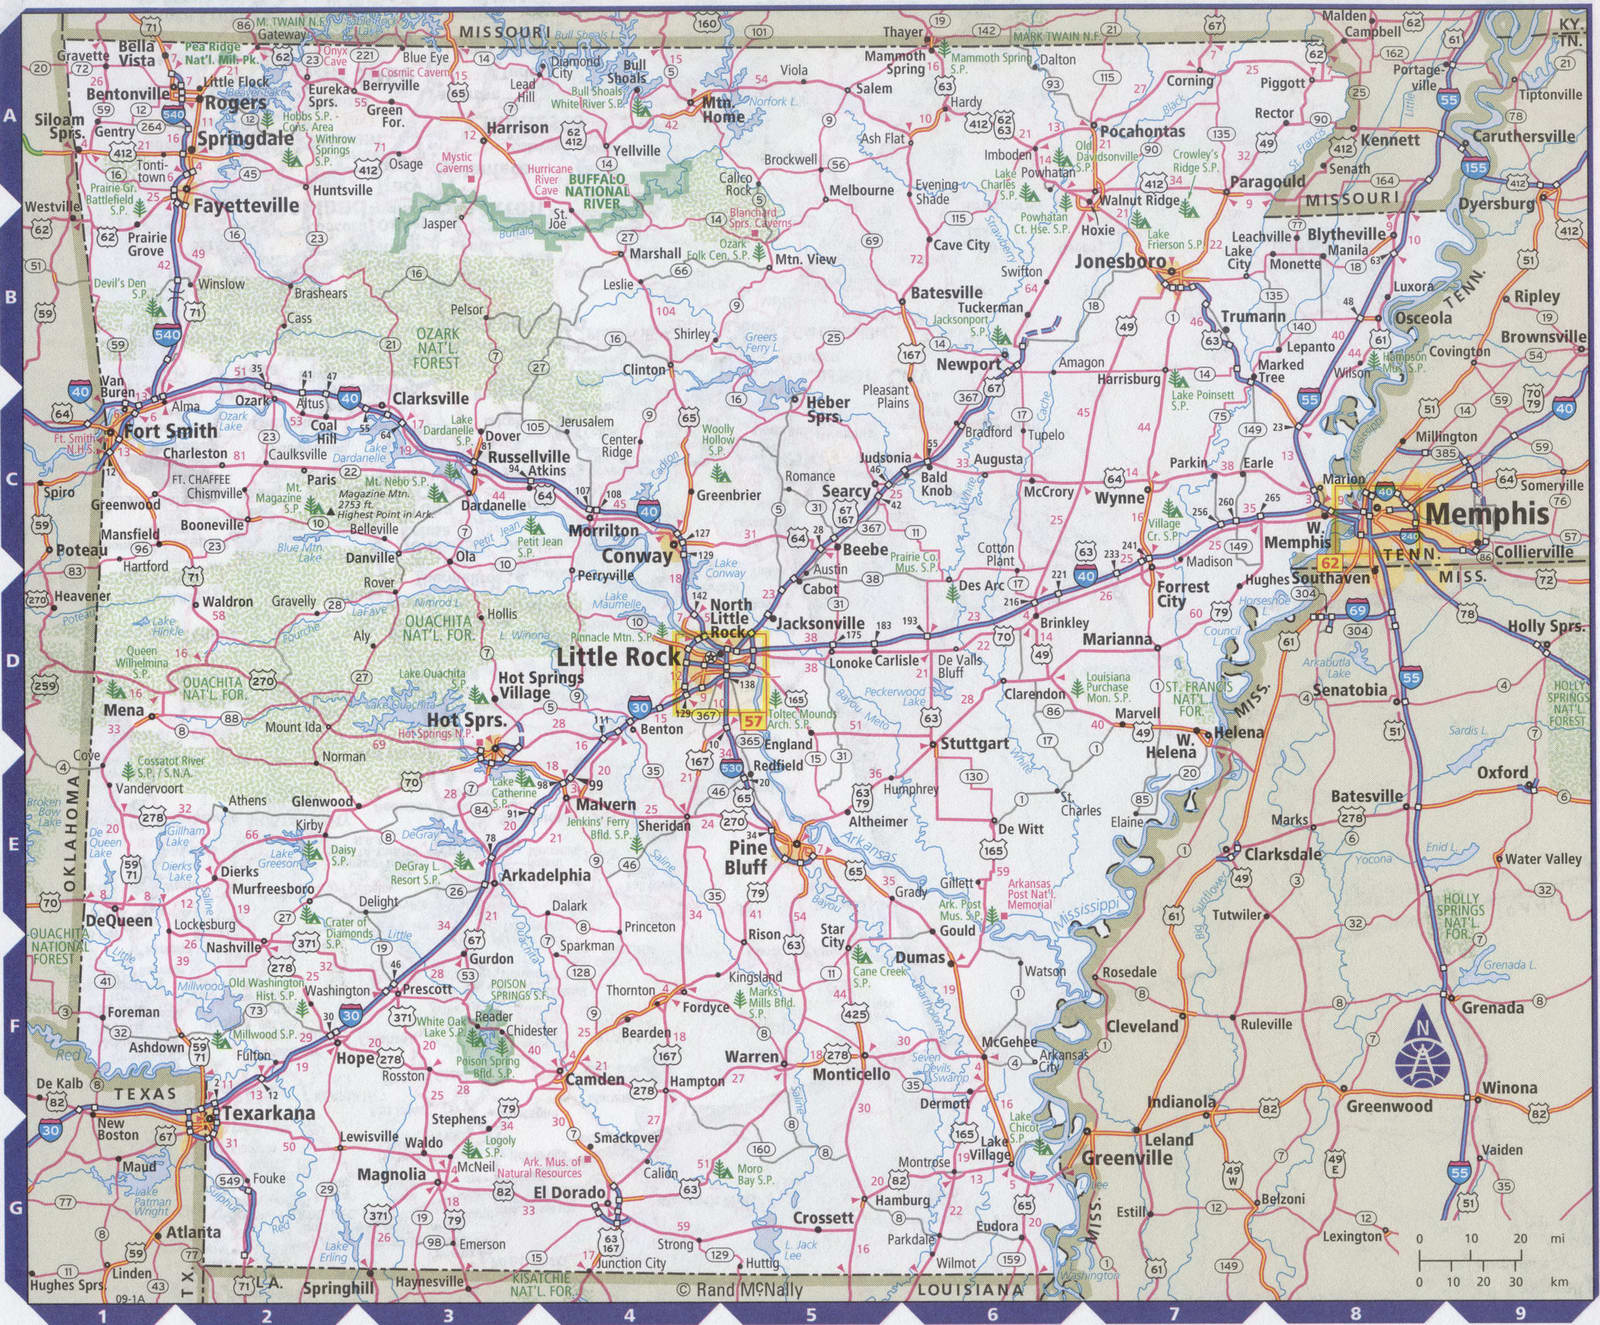 Arkansas state complete map